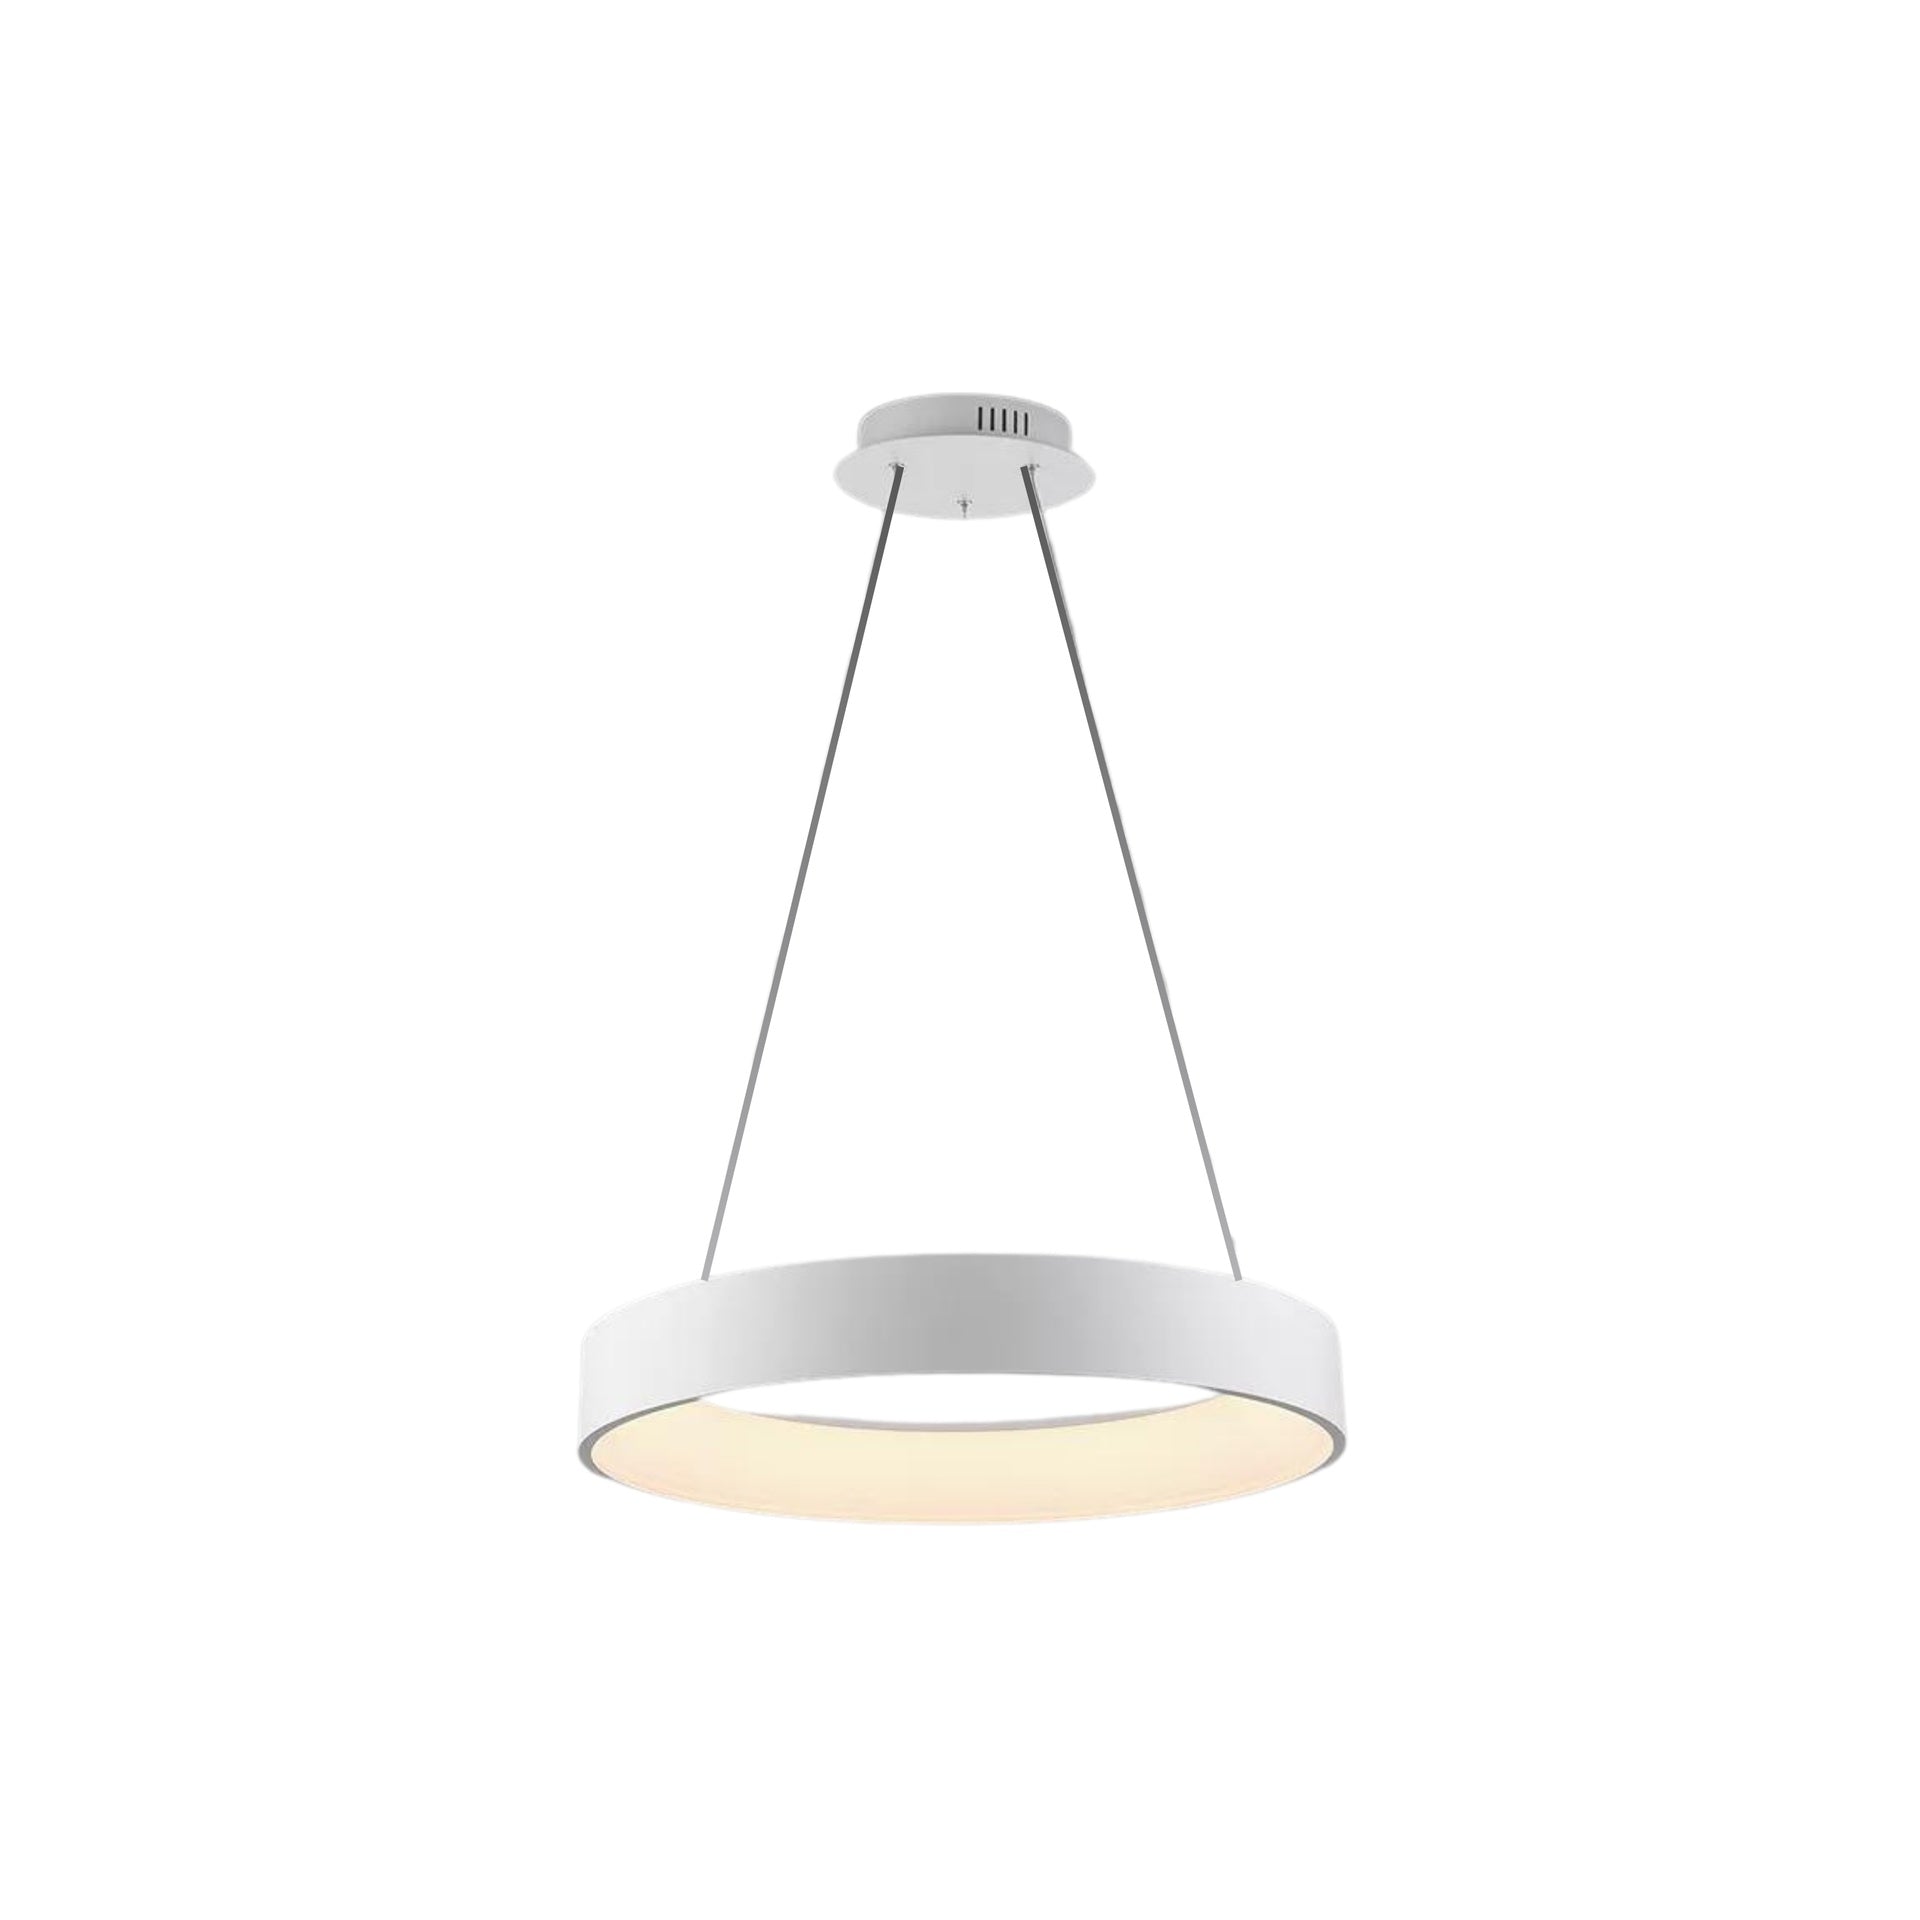 Brushed Silver Pendant Lamp D30.7" H59.06" 60W Triac Dimmable 3000K 120v/60Hz